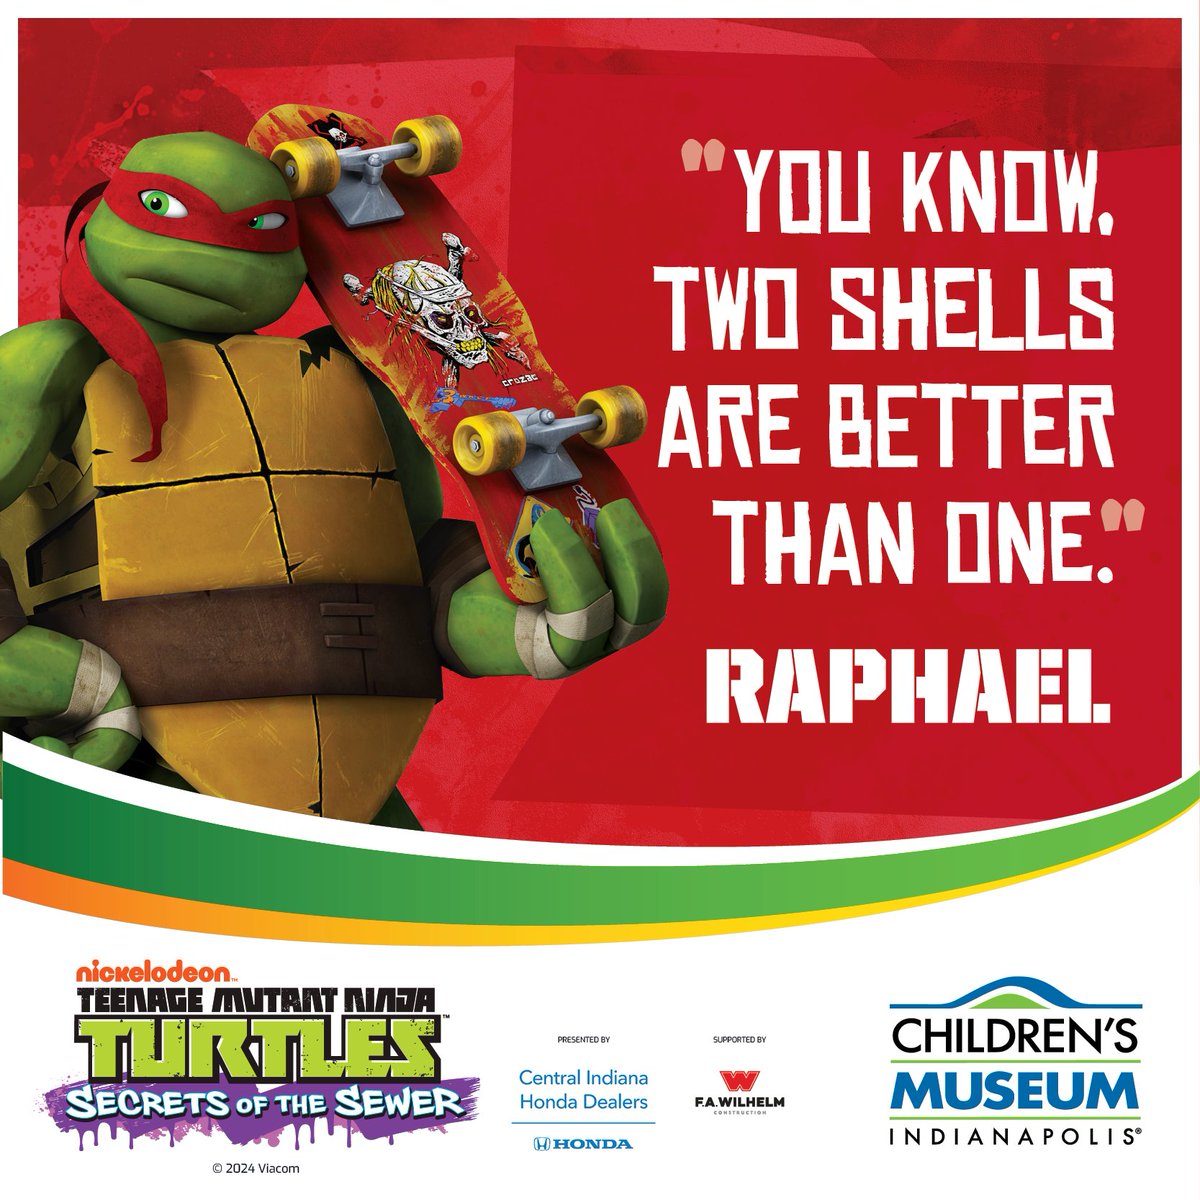 And, as Mikey would tell you, two pizzas are better than one! Get your tickets to Teenage Mutant Ninja Turtles: Secrets of the Sewer—it’s Turtle-y awesome: bit.ly/41R3YzC